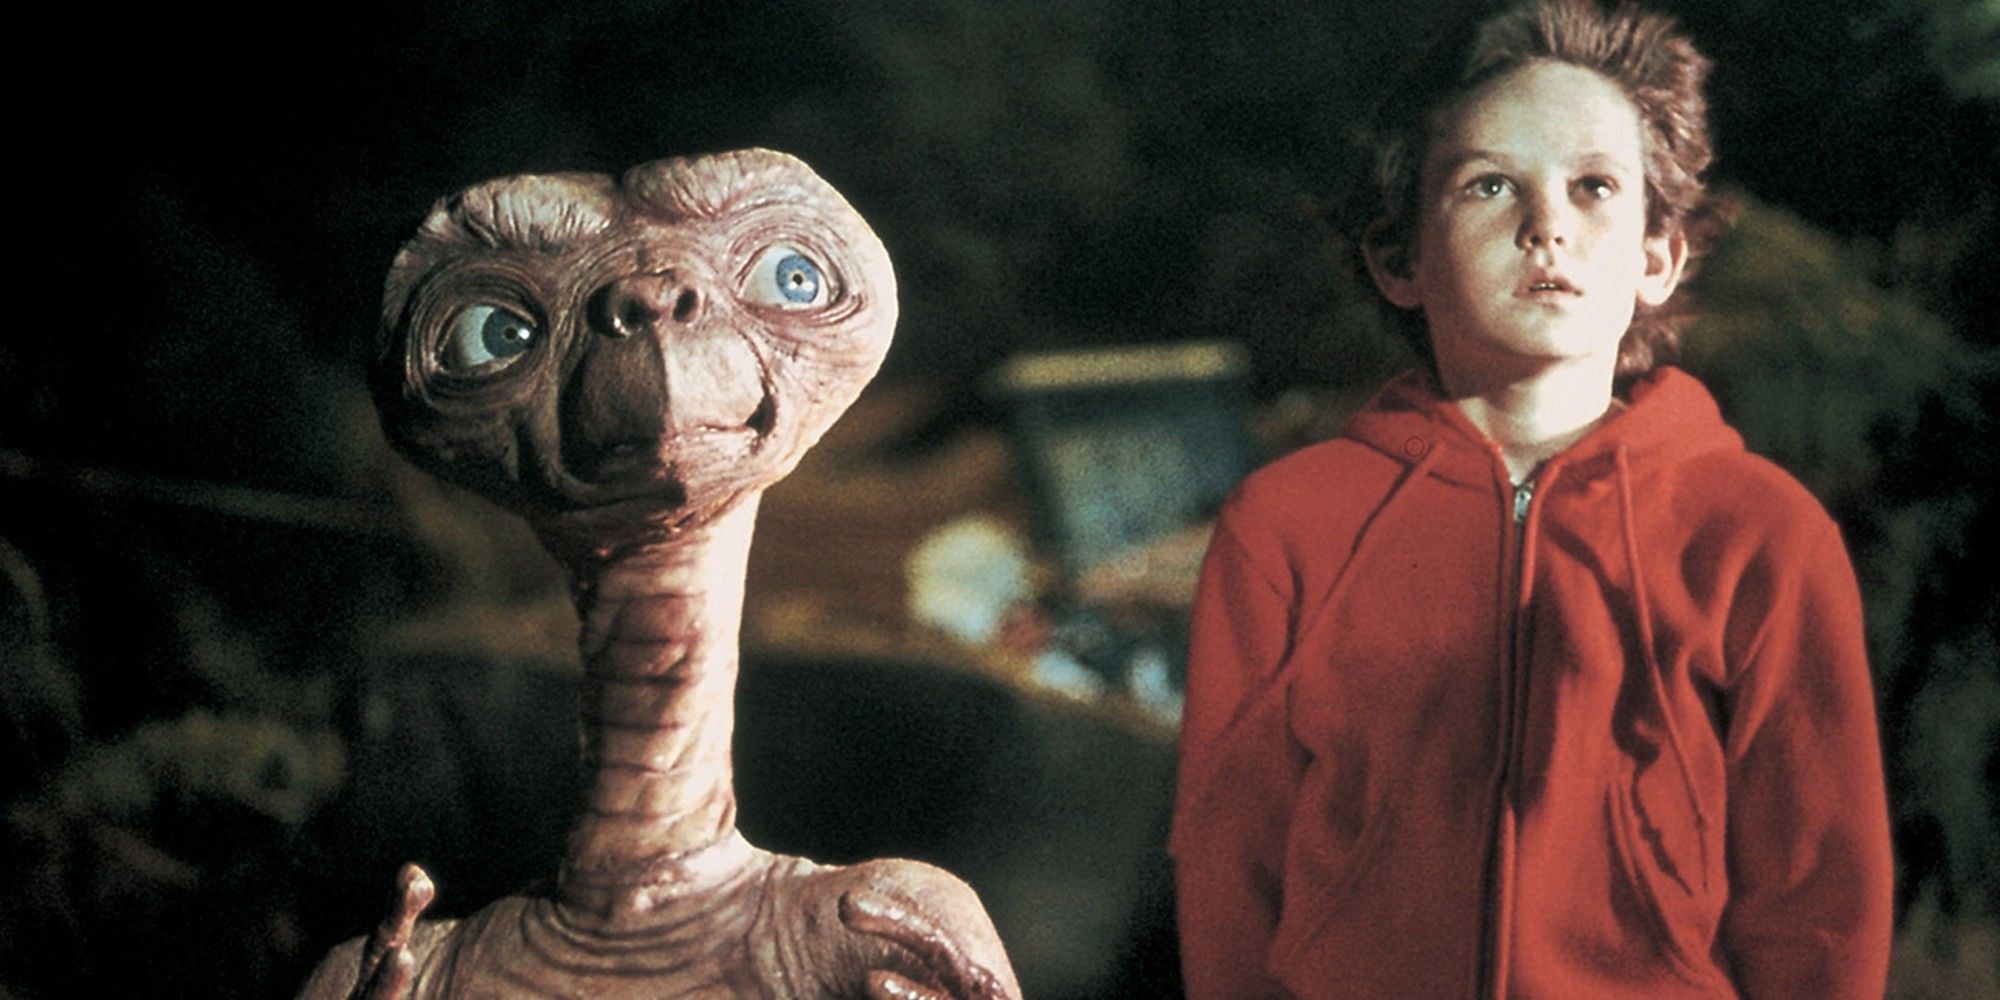 Henry Thomas and E.T in 'E.T the Extra-Terrestrial' (1982)